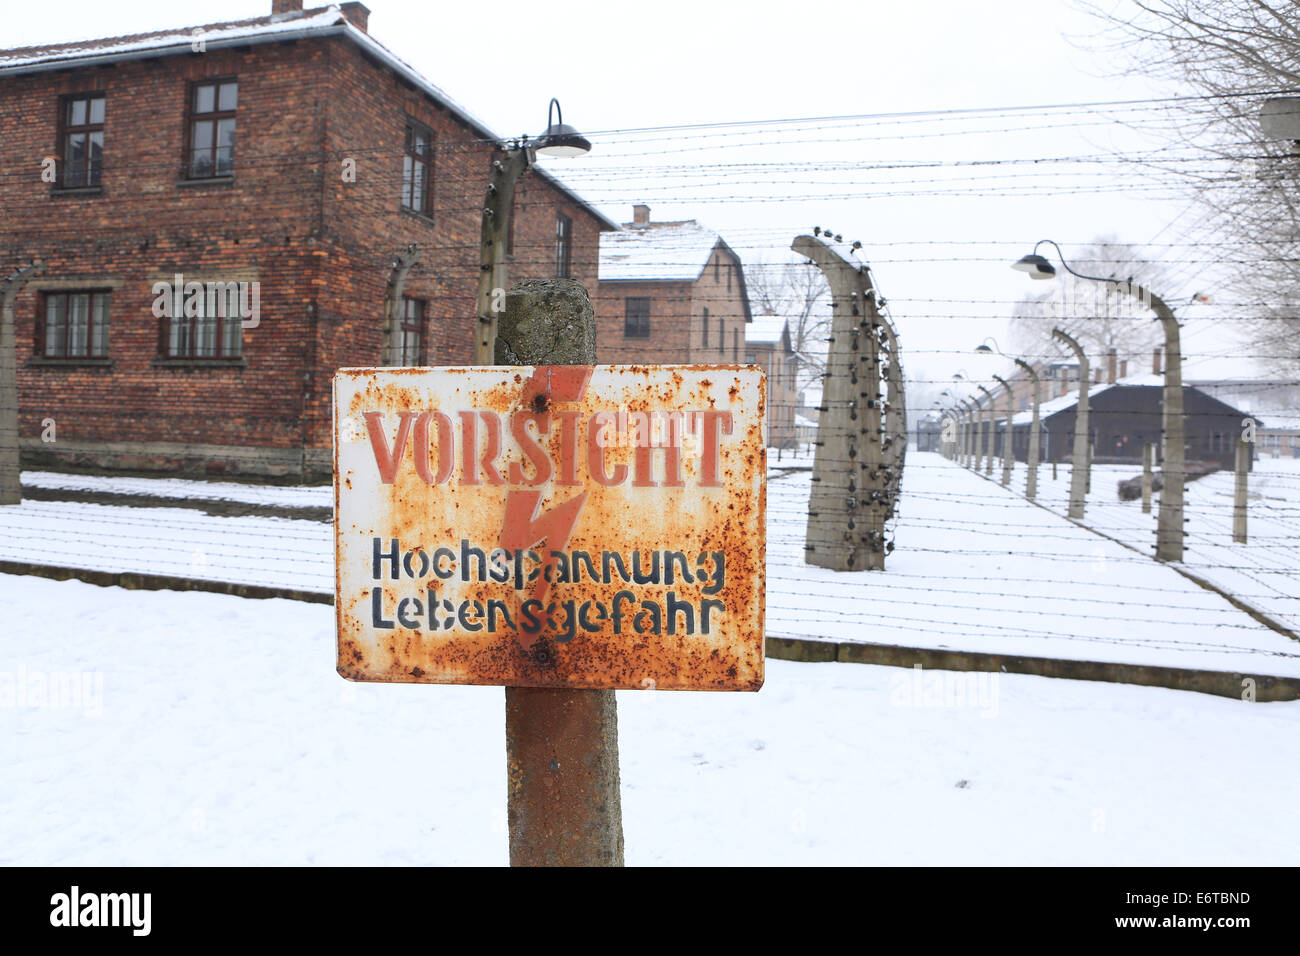 Auschwitz-Birkenau concentration and extermination camp in Winter Stock Photo